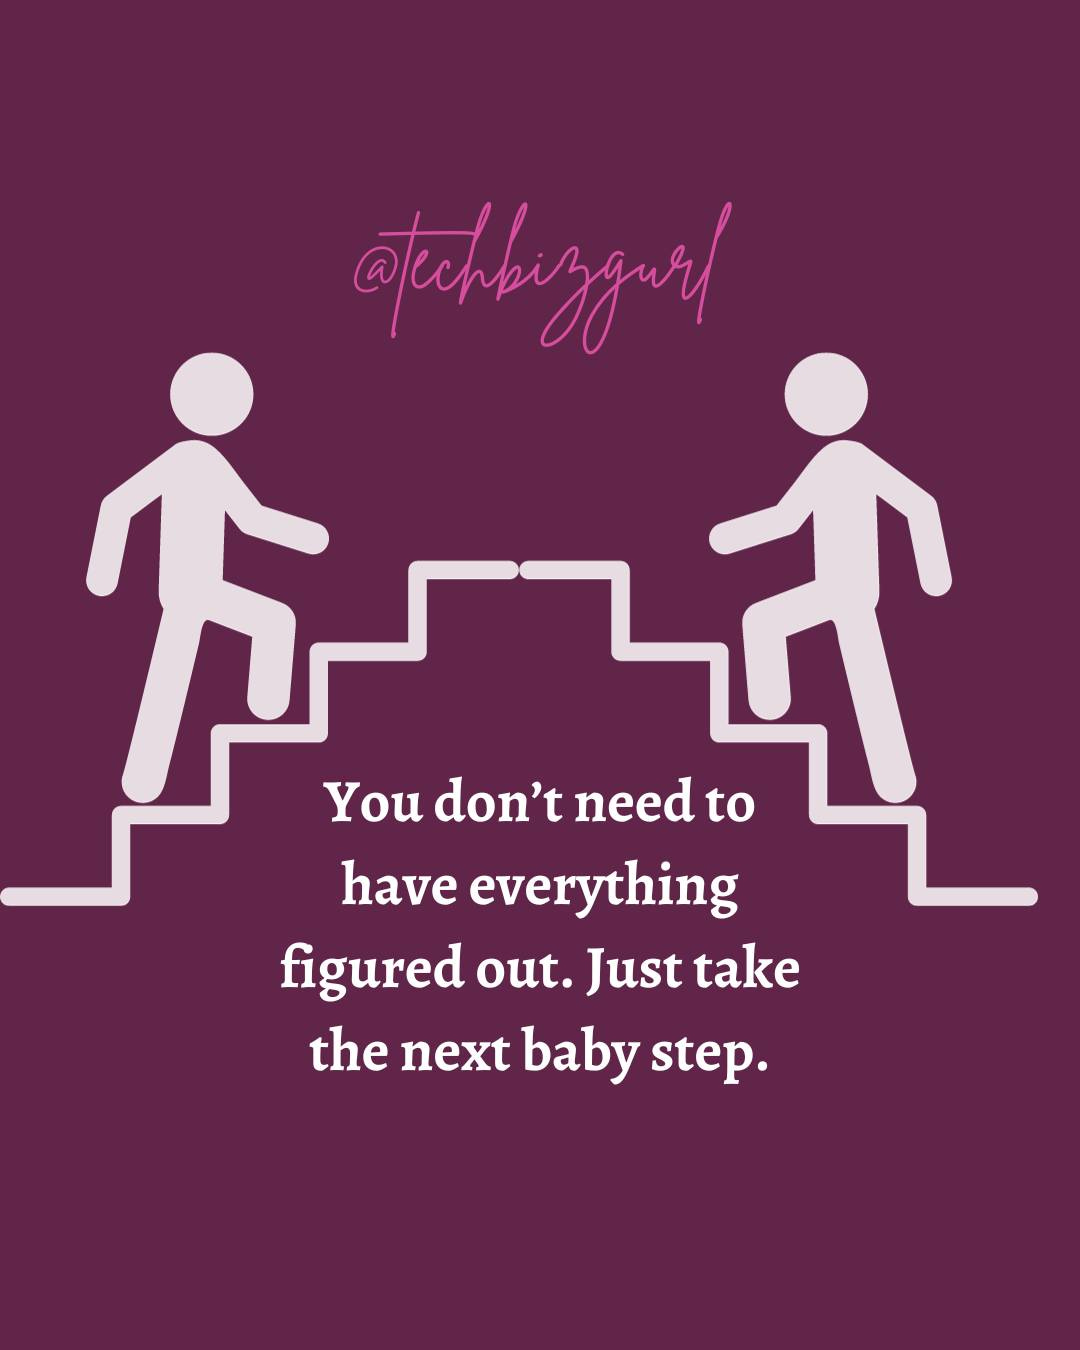 May be an image of ‎text that says '‎@techburzgarl You don't need قسز to have everything figured out. Just take the next baby step.‎'‎